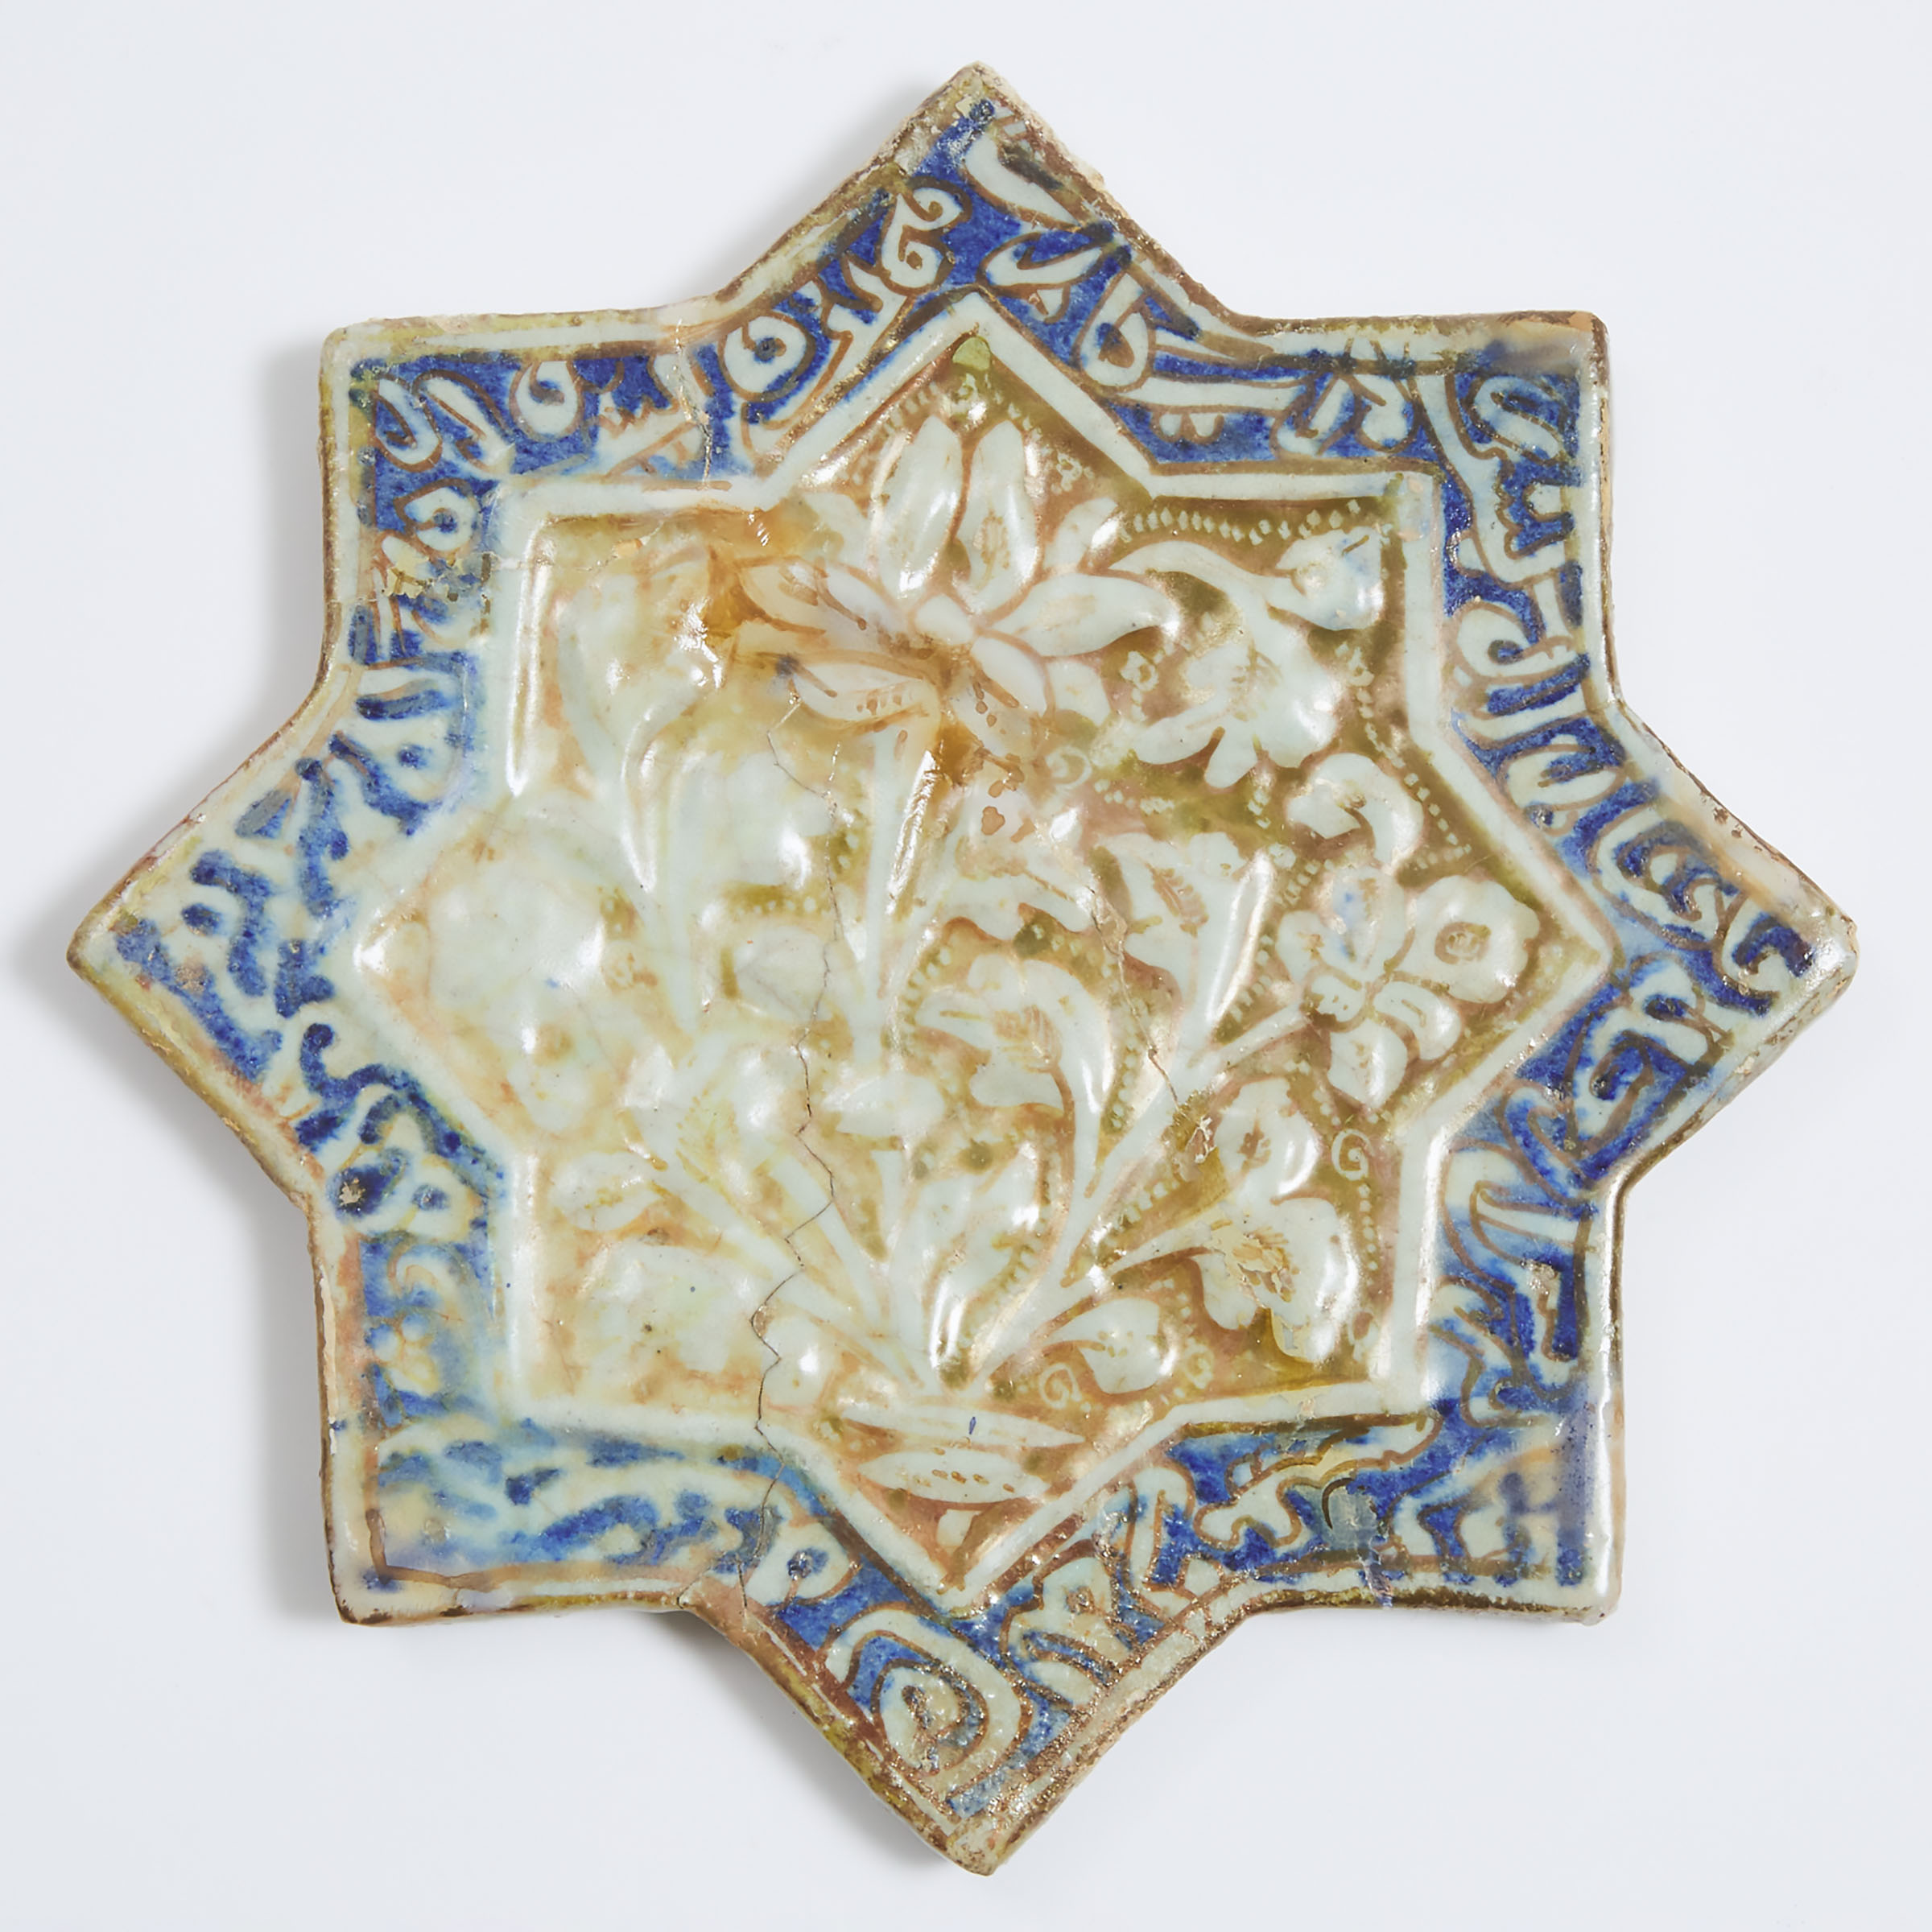 A Central Iranian Kashan Lustre Pottery Star Tile, 13th/14th Century